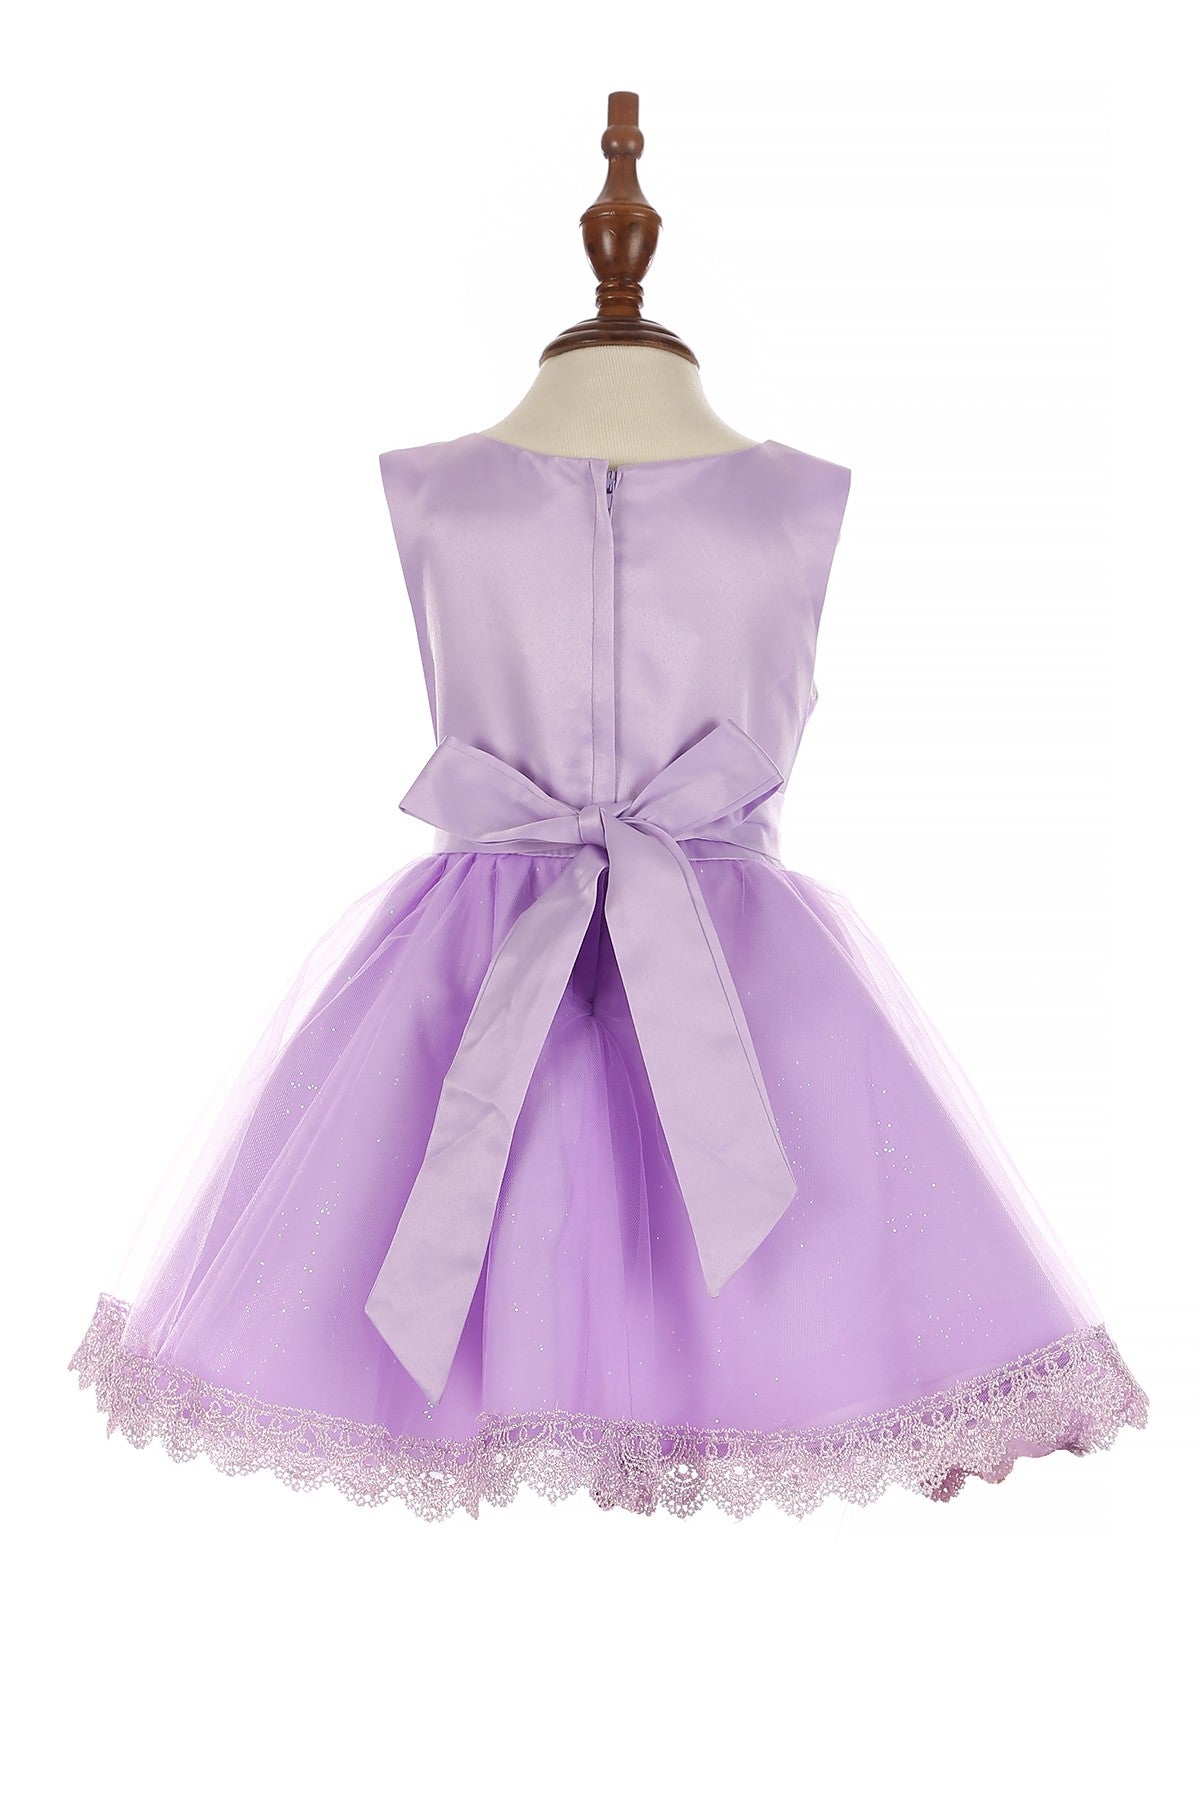 Beautiful Adorned With 3D Flowers Lace Tulle Skirt Kids Dress CU9126B Elsy Style Kids Dress